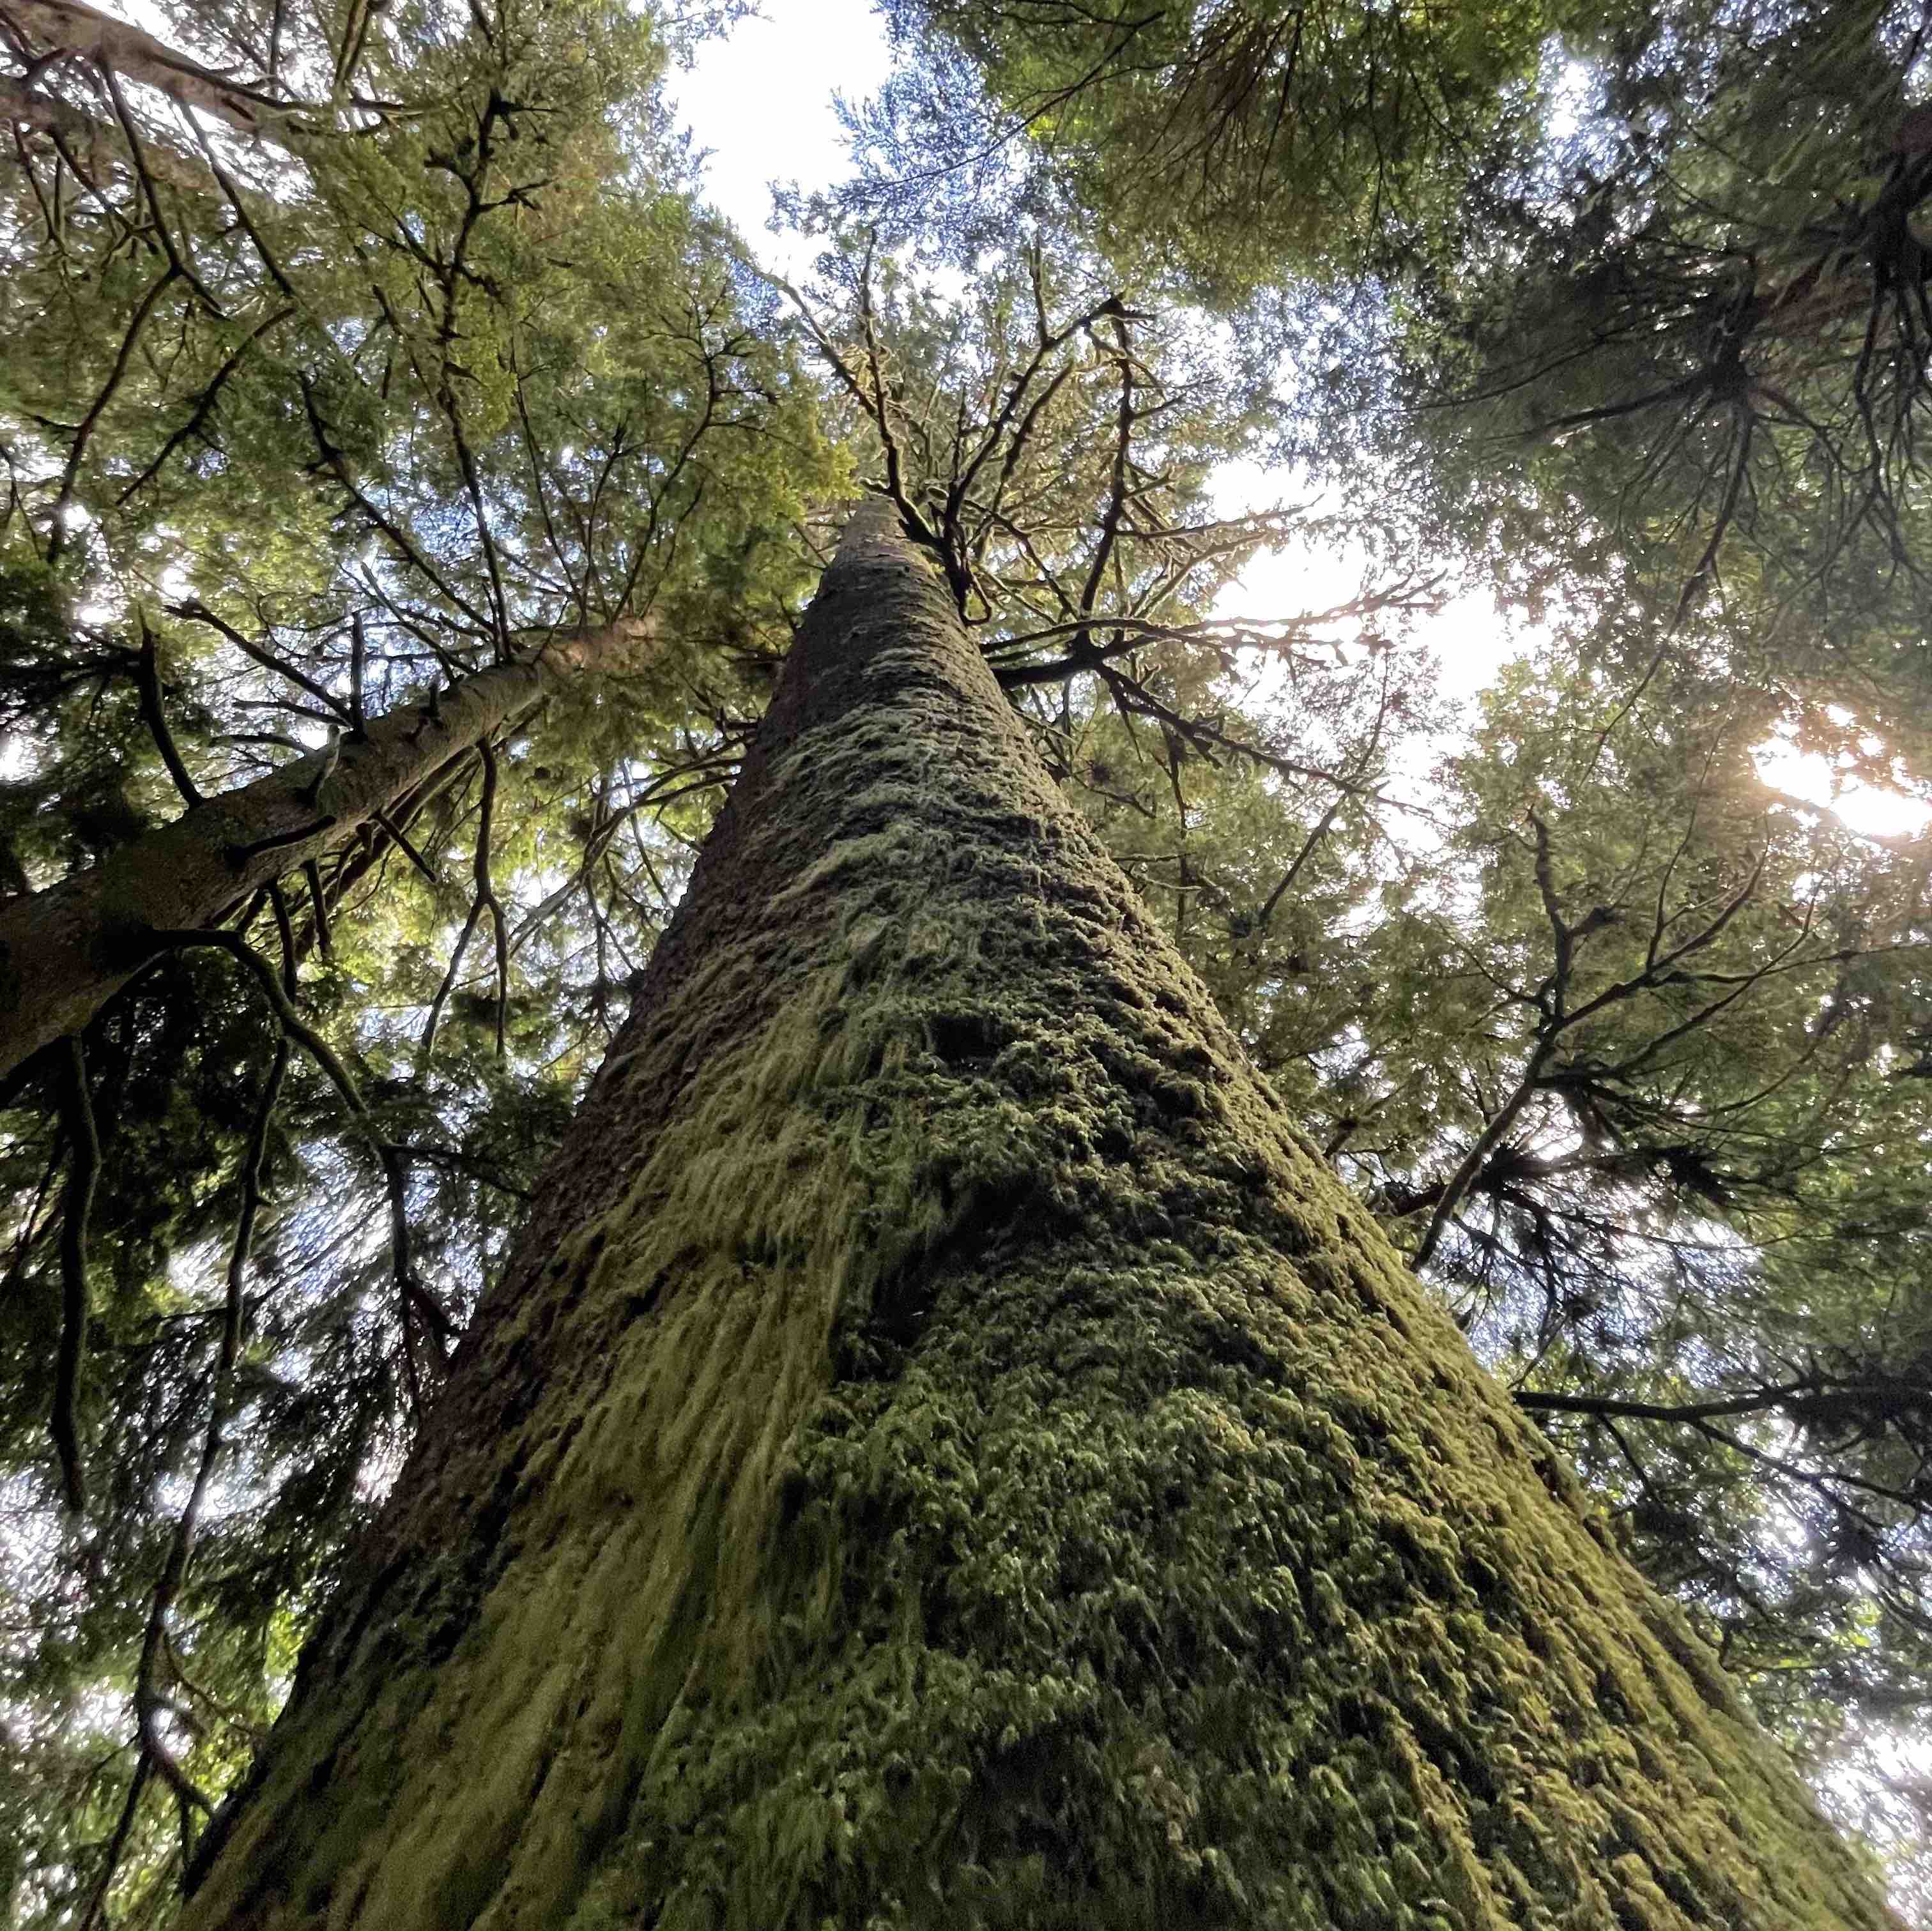 Image of a tree in an Oregon forest